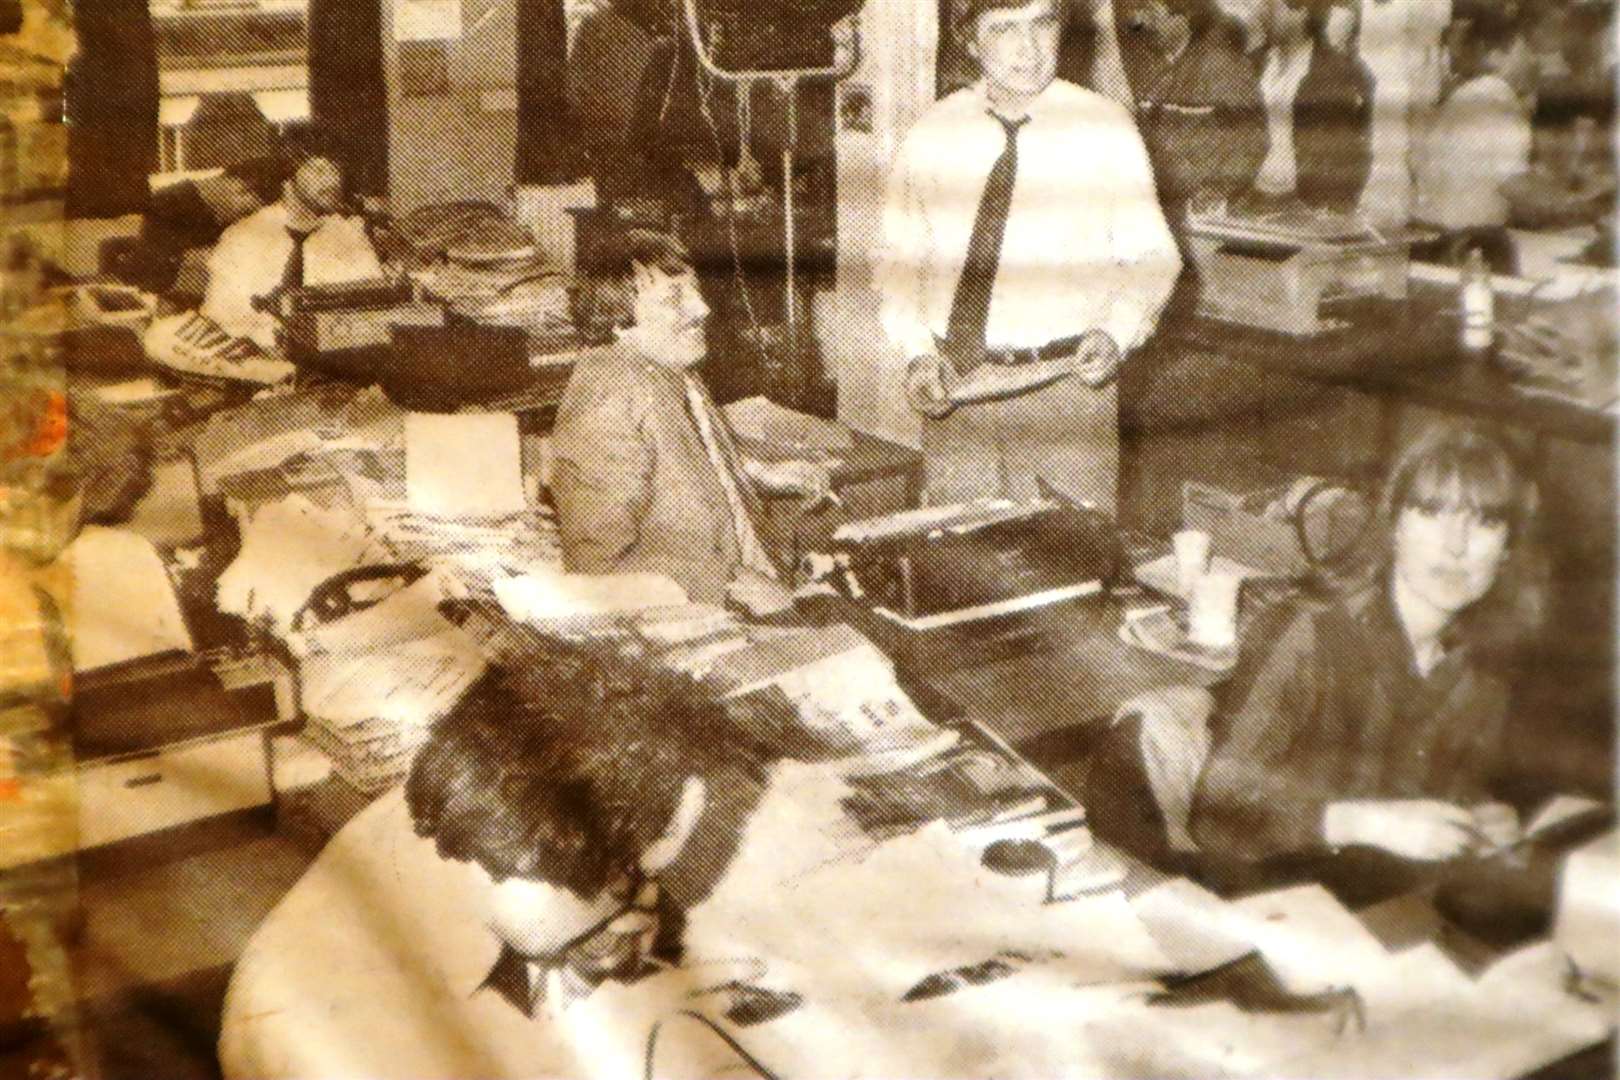 Peter Tilbury as editor Malcolm Proby gets some tips from reporters while filming the TVS drama CATS Eyes in the Kent Evening Post's offices in Chatham High Street in March 1985. In the picture are Carolyn Henderson, Malcolm Triggs, Graham Cole, Ian Read and Teresa Driscoll